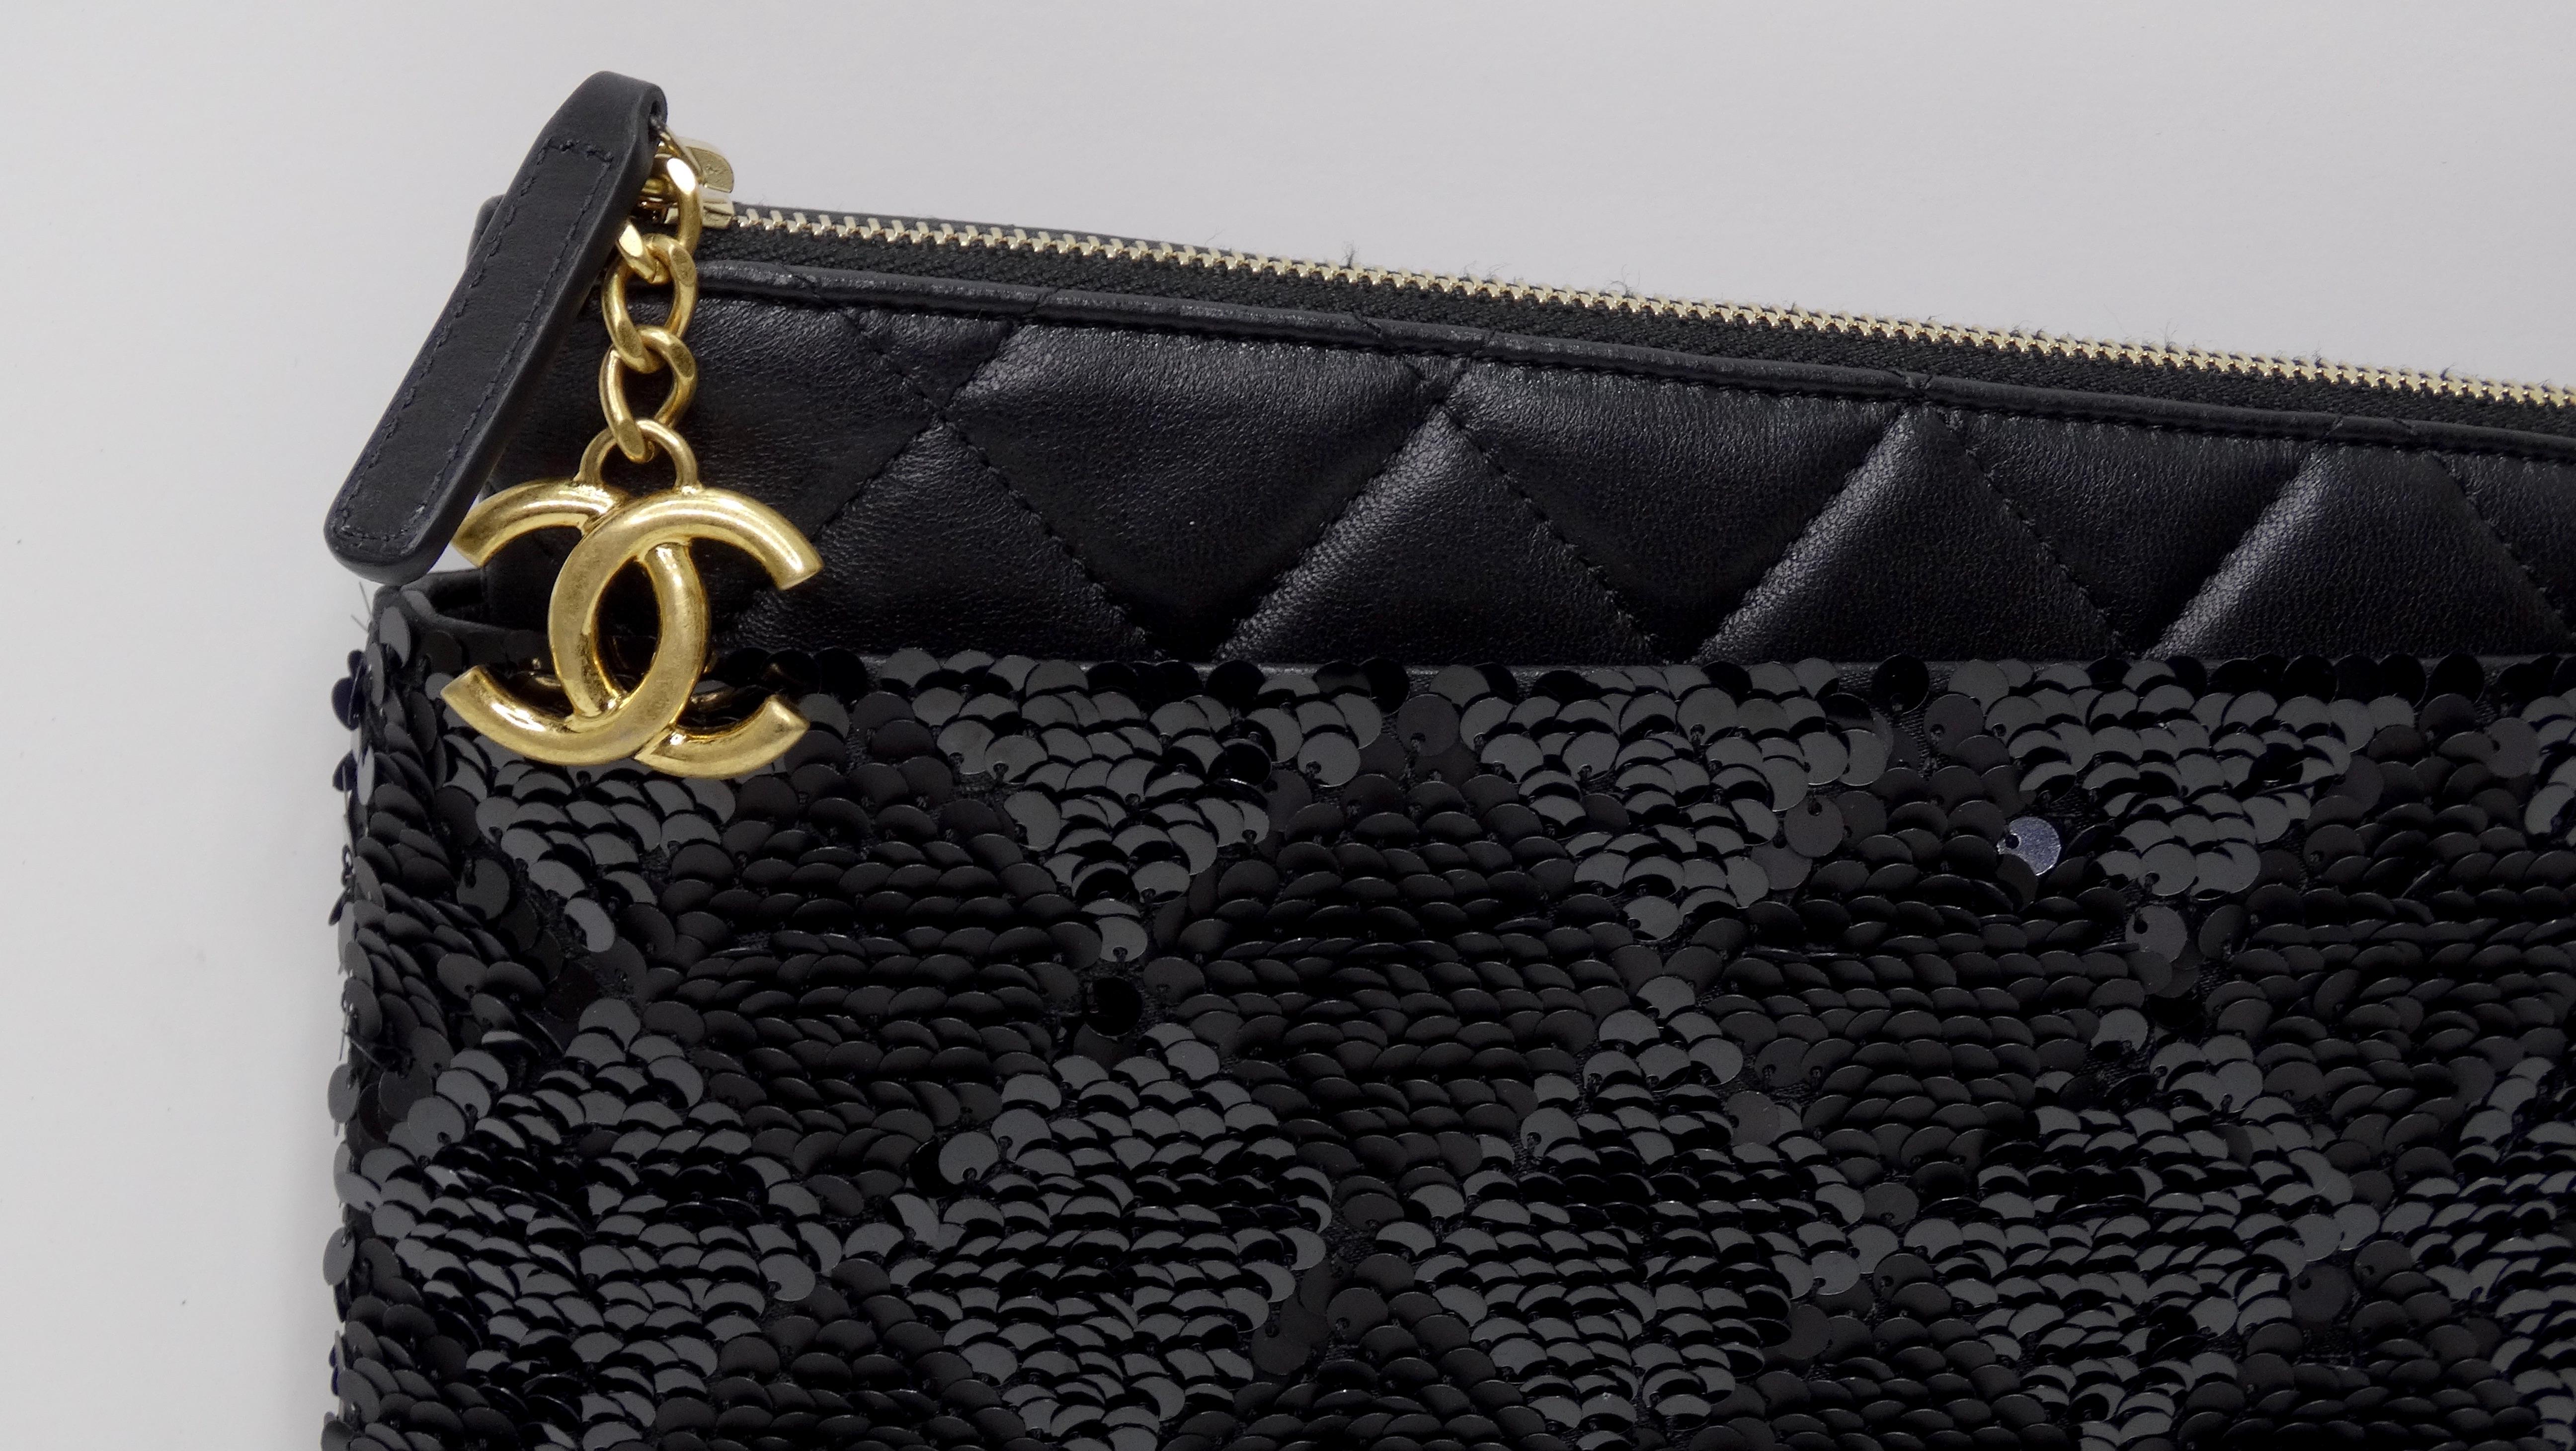 Get your hands on the most luxurious Chanel clutch you can find! This is a highly textured Chanel clutch with an ultra-soft leather quilted leather contrasted with extremely textured sequin body in a checkered pattern. The leather is accompanied by